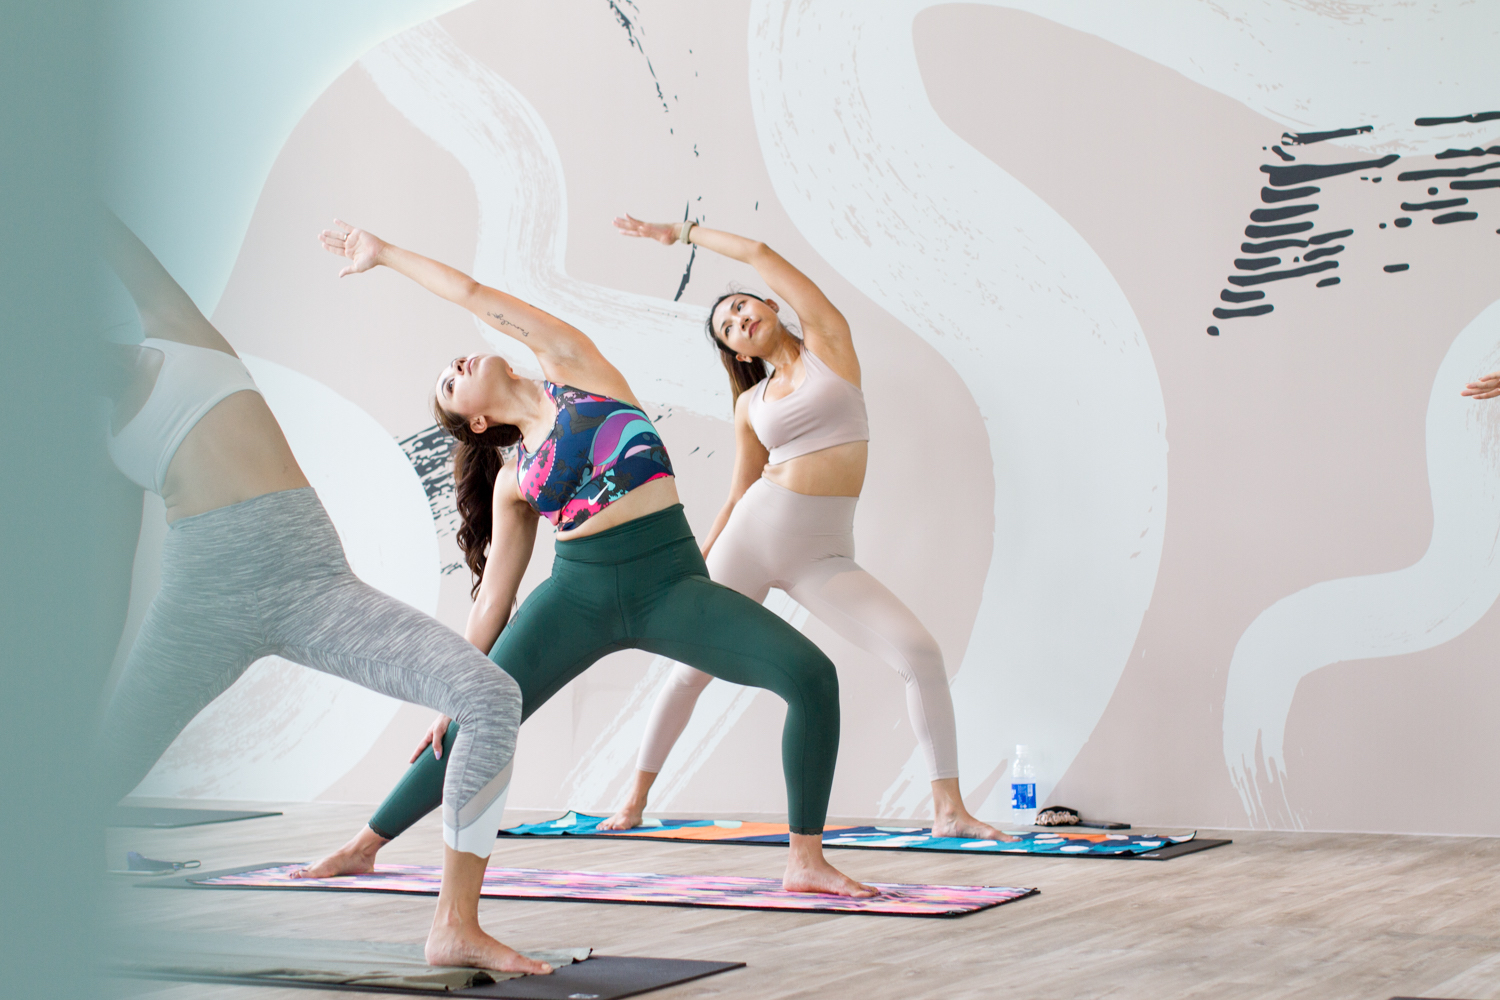 YOGA MOVEMENT PUSHES BOUNDARIES WITH ITS NEW DESIGN-CENTRIC ORCHARD FLAGSHIP STUDIO